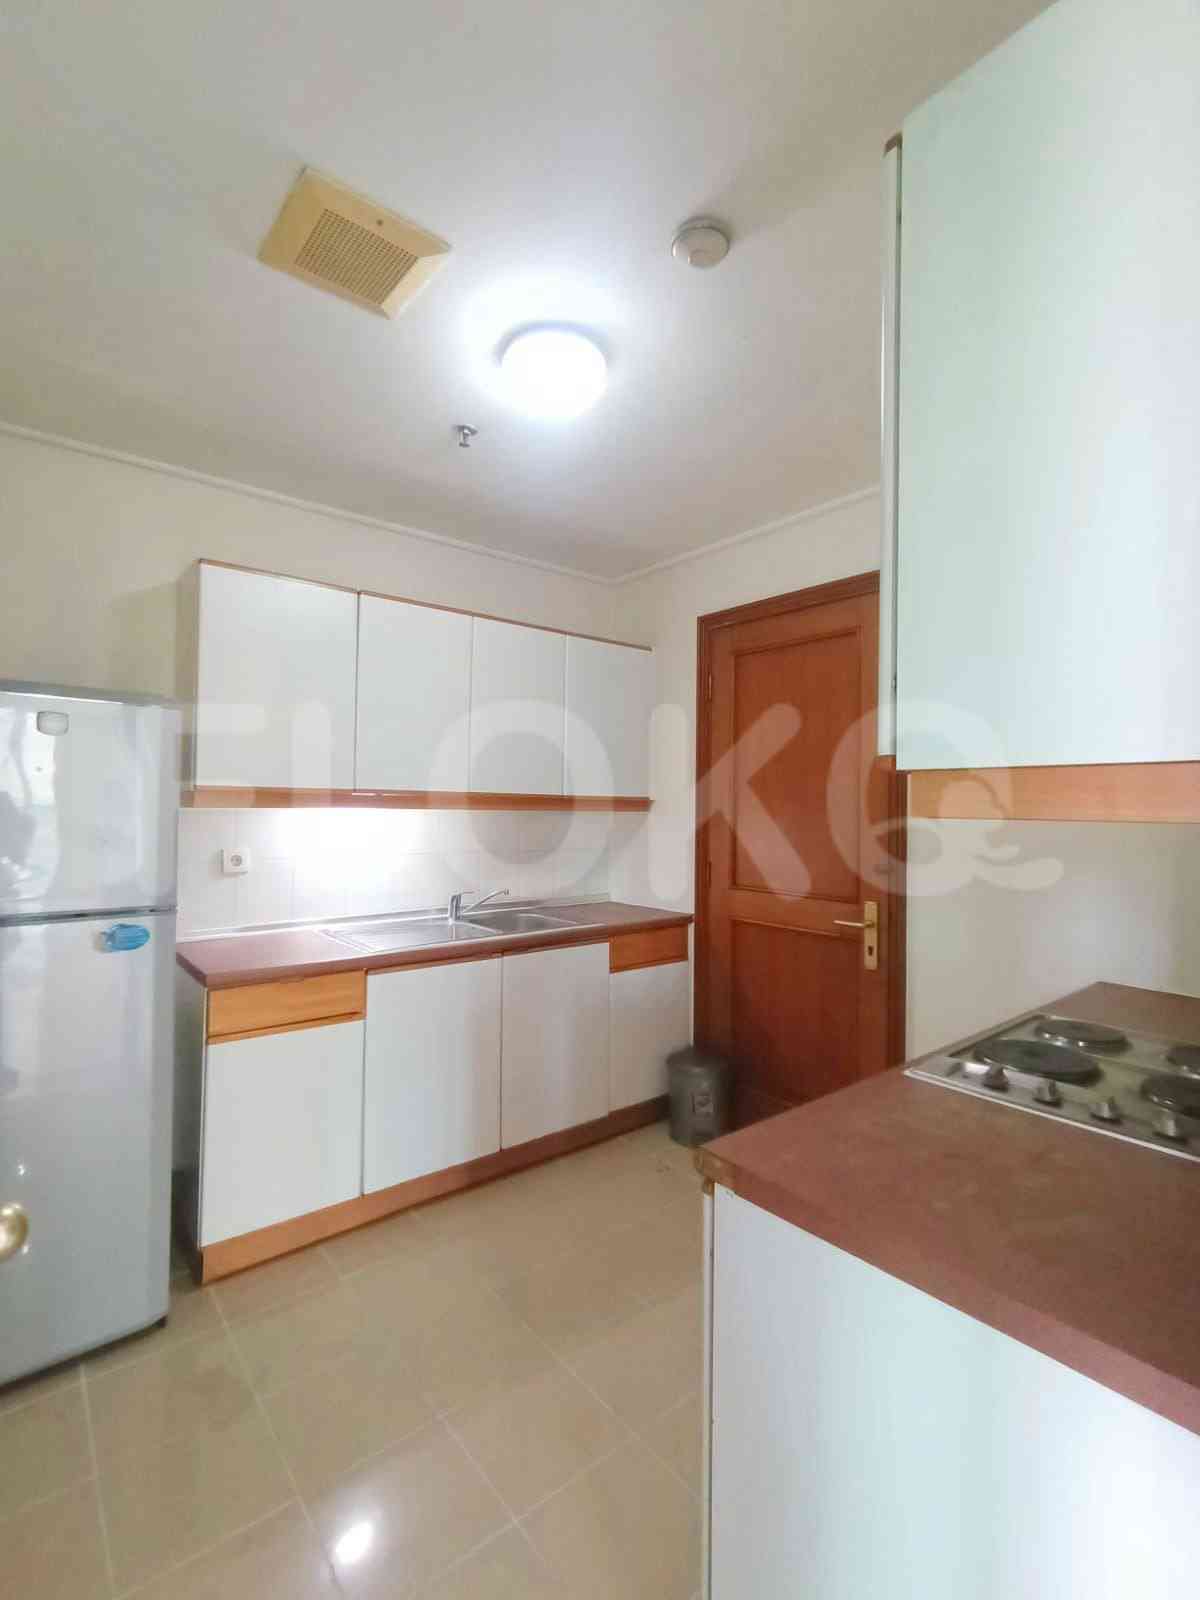 3 Bedroom on 15th Floor for Rent in Casablanca Apartment - fte88e 6